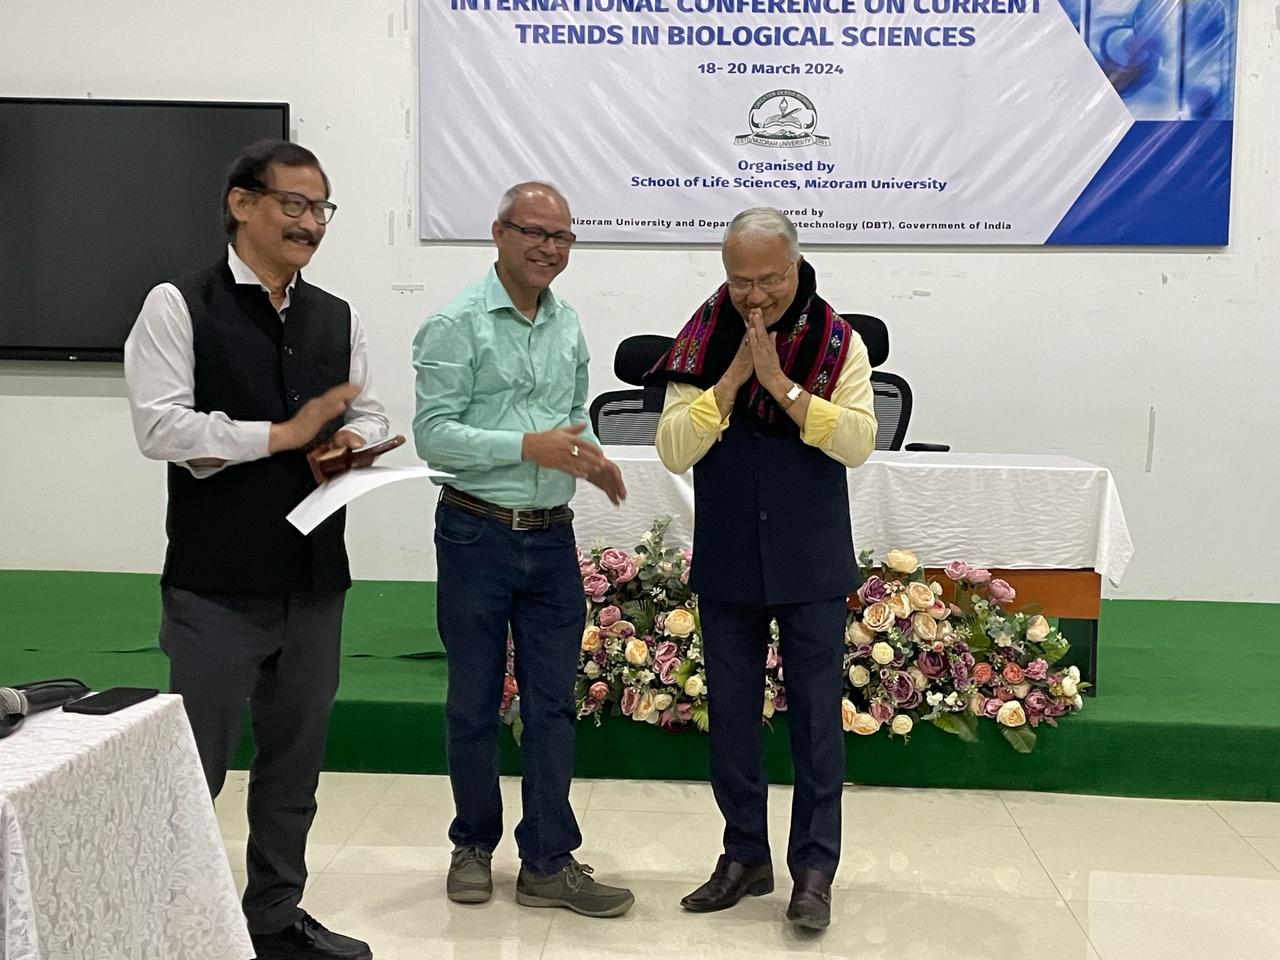 Prof. Bidyut Kumar Sarmah delivers the Lead/Invited talk during the International Conference on current trends in Biological Science at Mizoram University